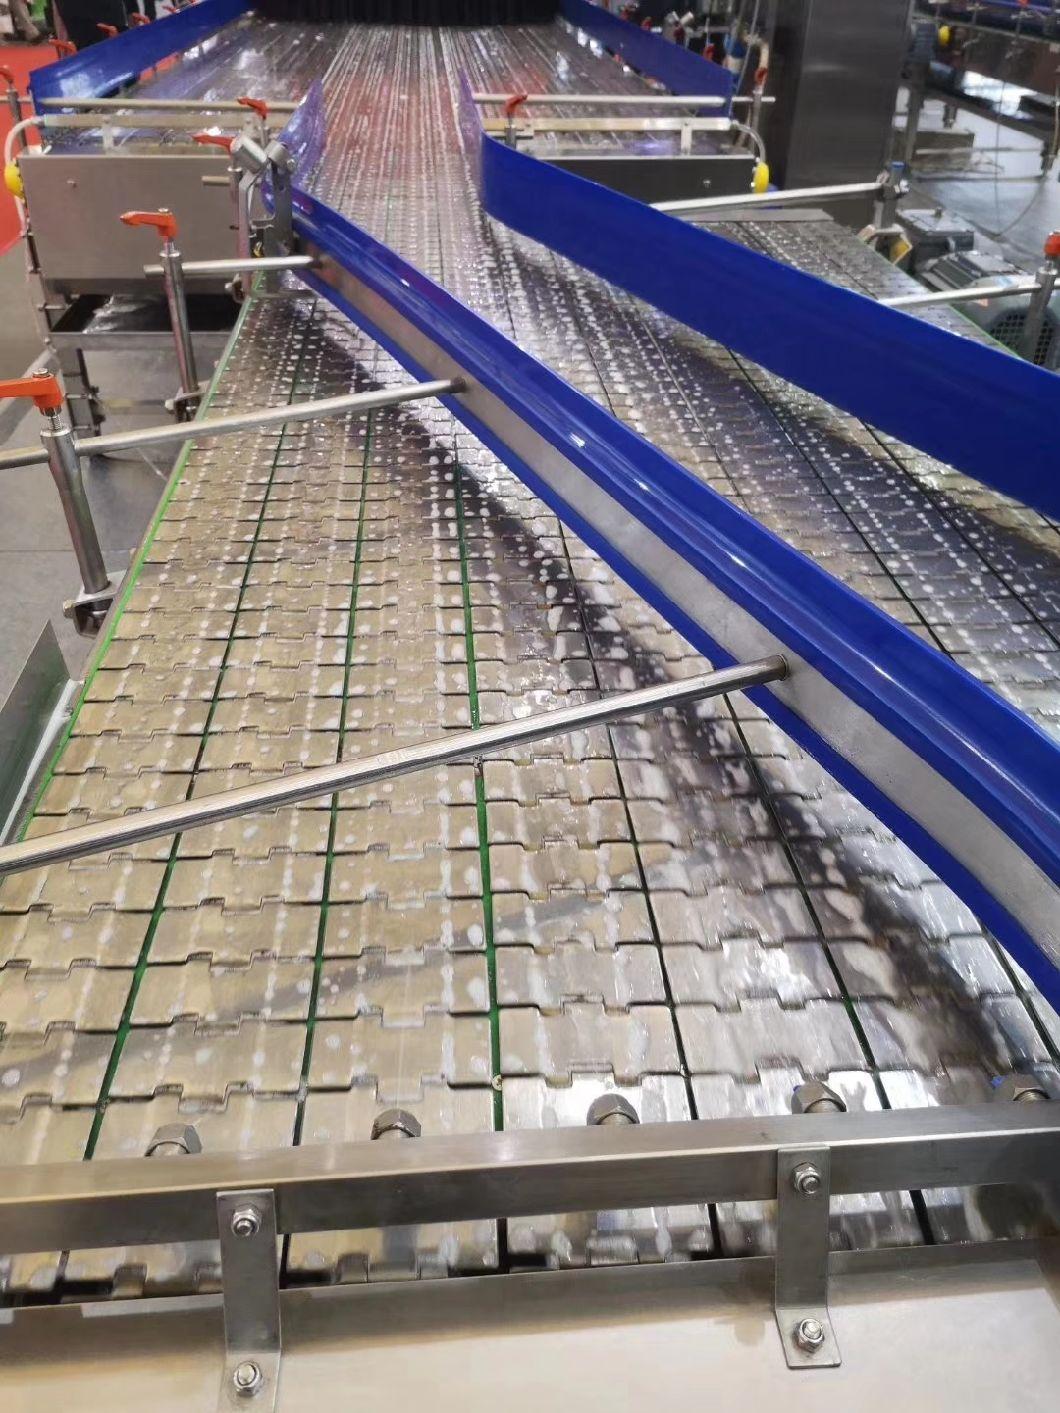 Ss Chain Conveyor From China Manufacture Bottle Filling Machine Conveyor